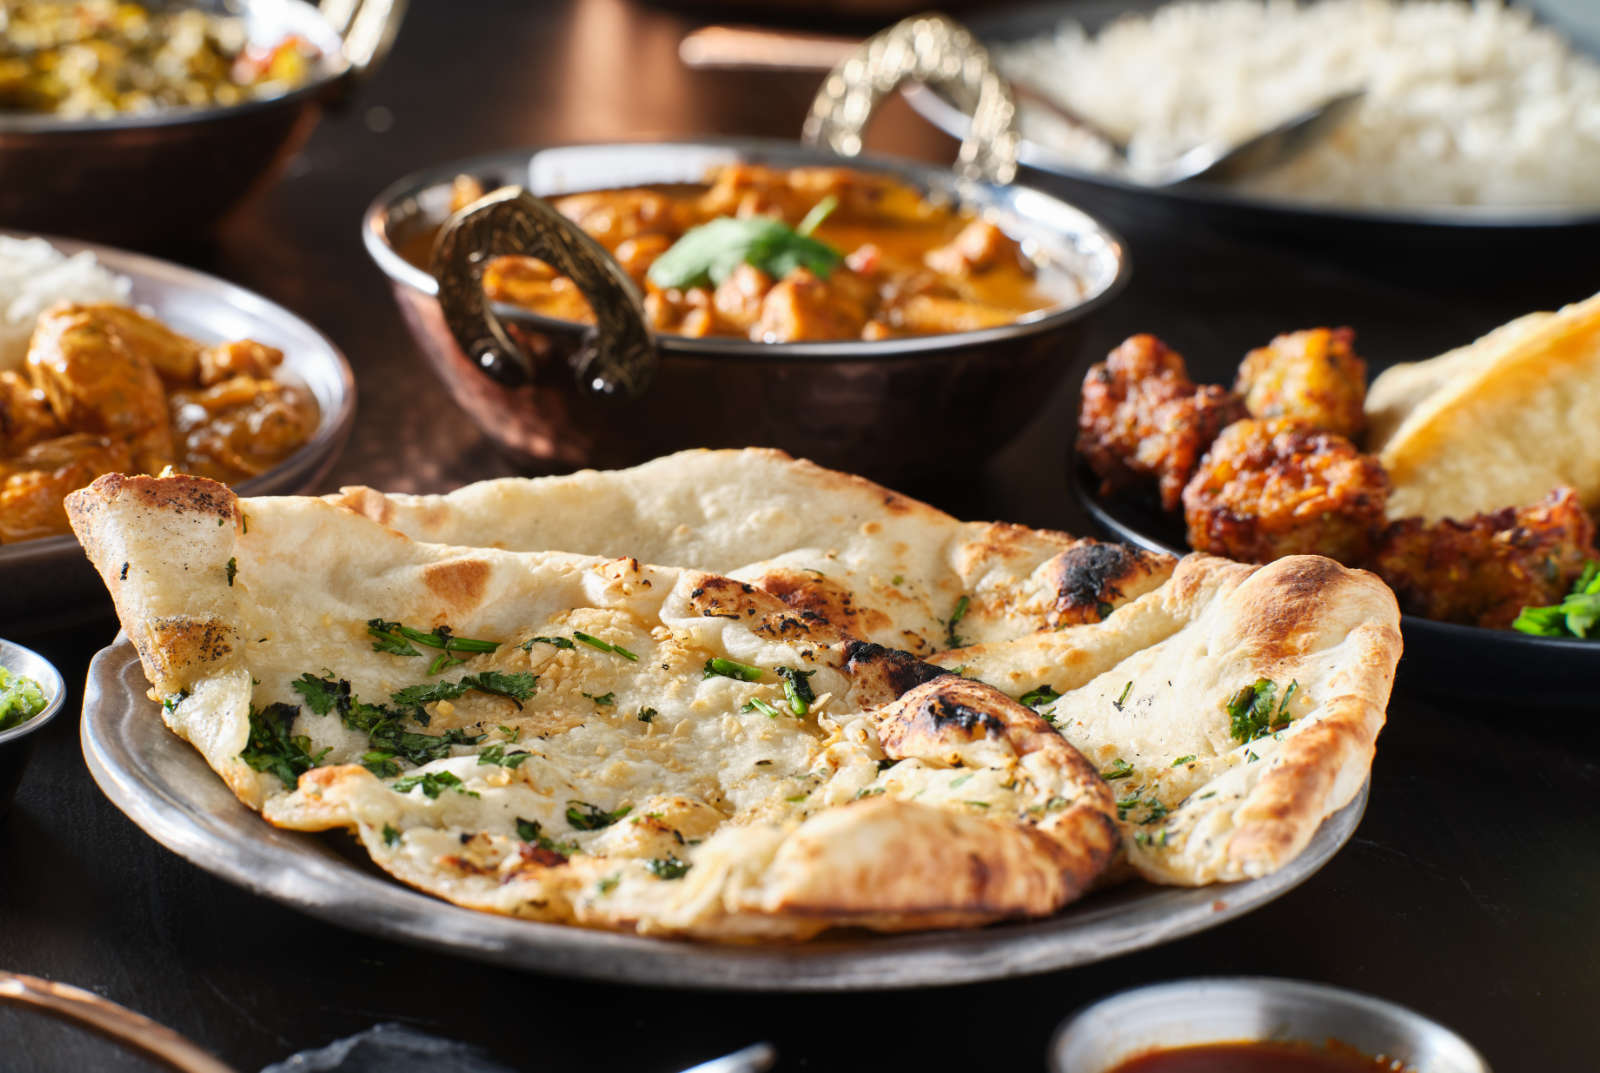 Dhaba Food: 4 Tasty Dhaba Dishes You Need to Try in India